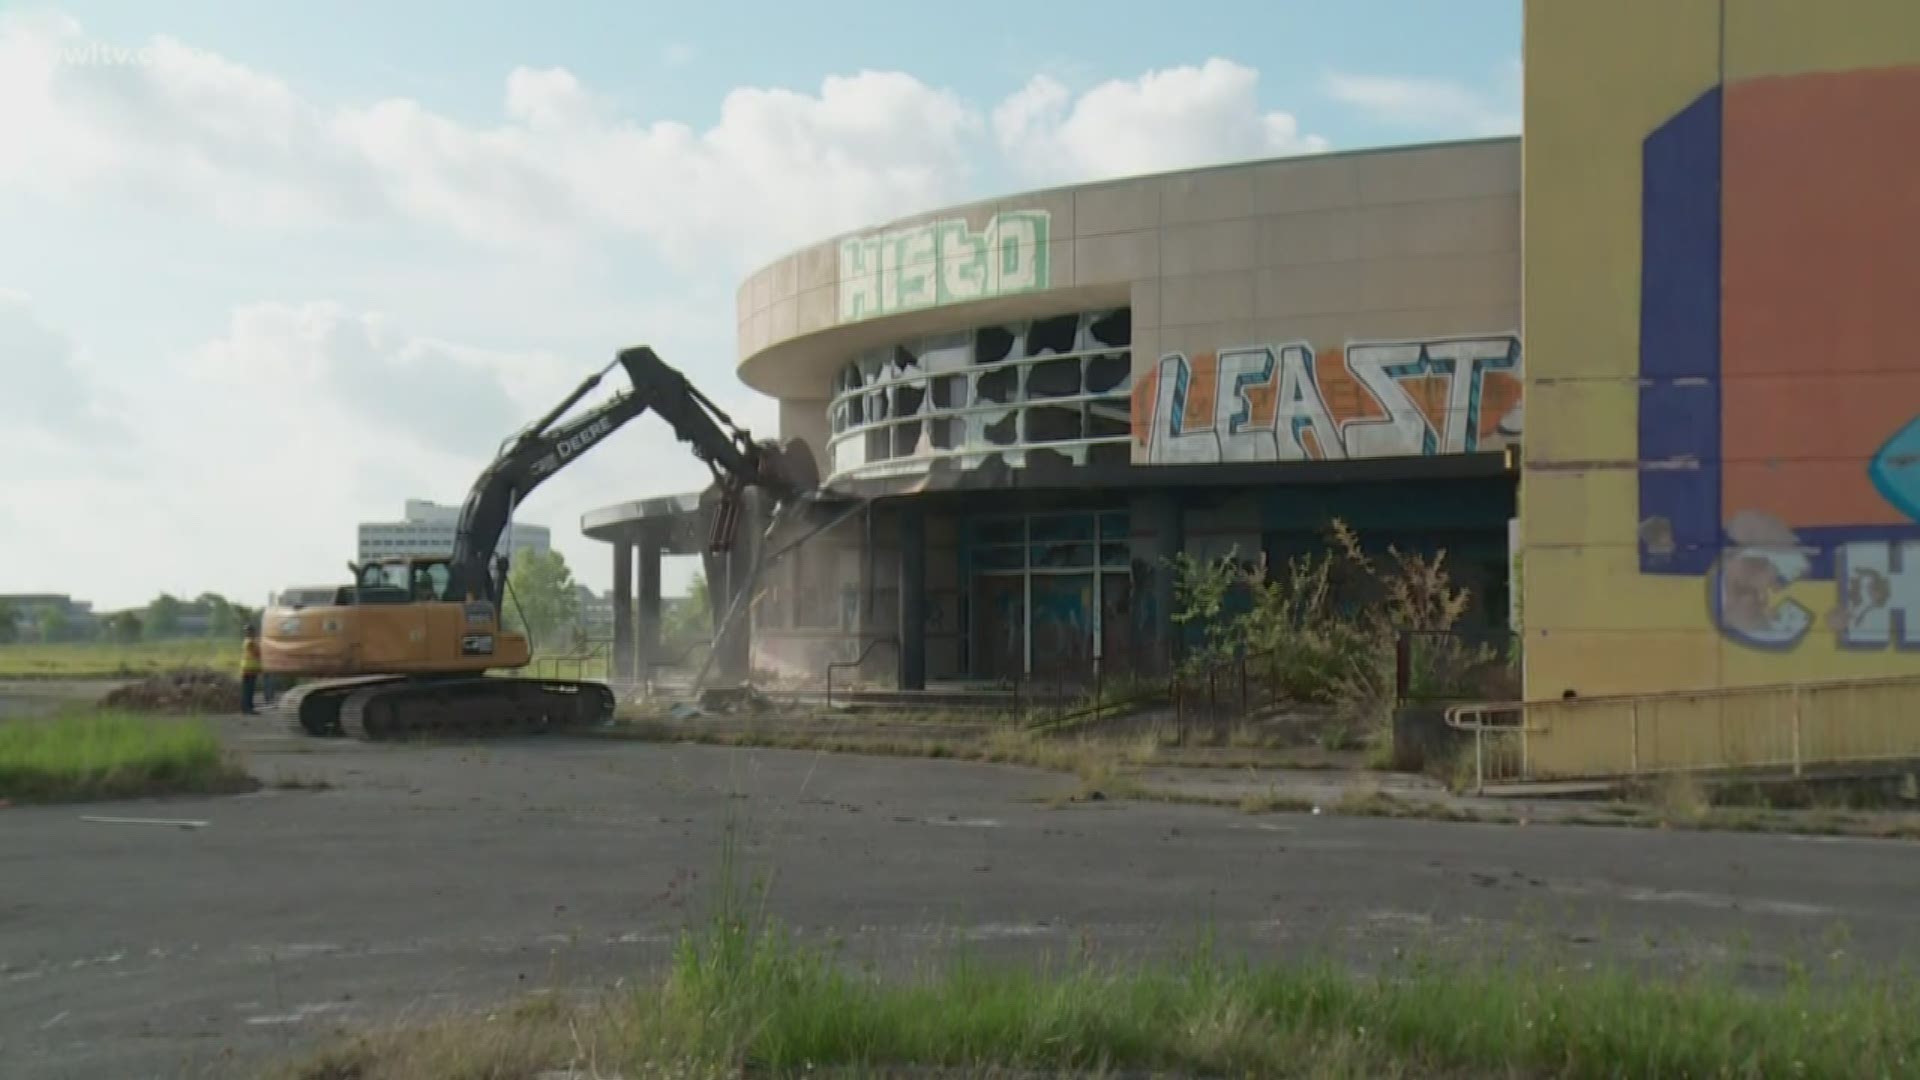 The city tore down the former movie theater after a fire broke out a week ago.